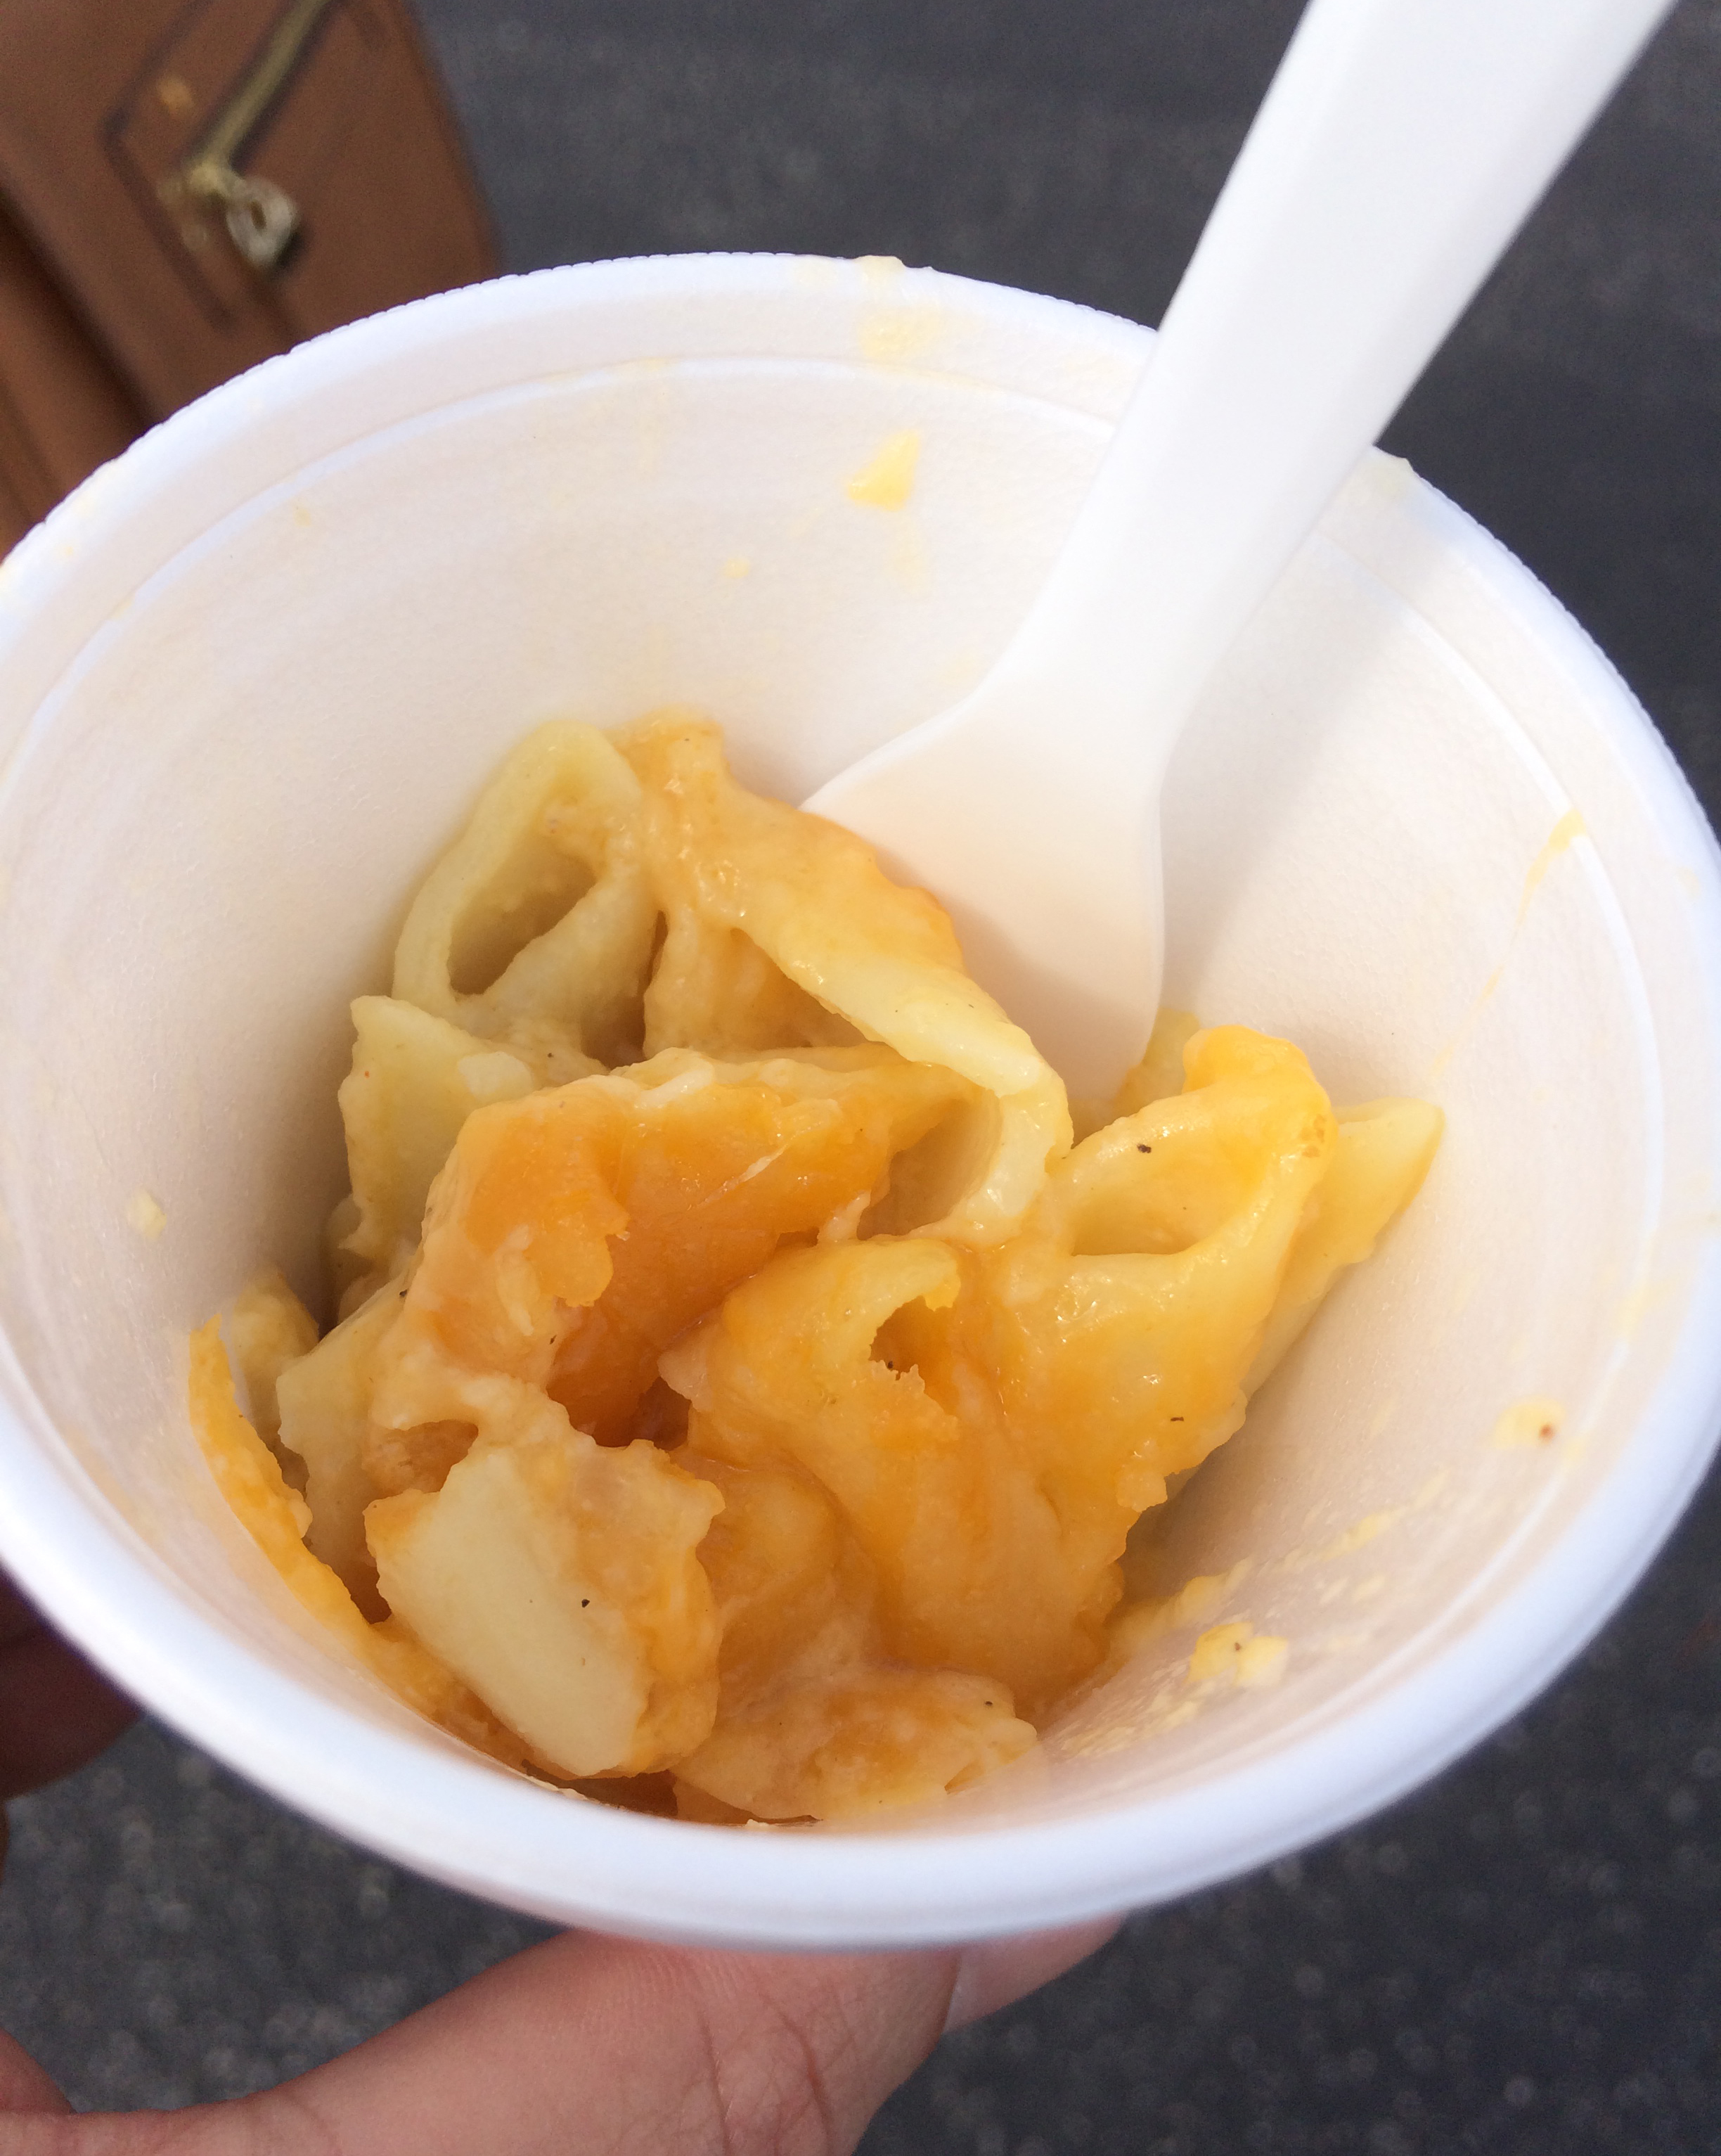 Although it might look like ordinary mac and cheese, this version was anything but typical. It was cooked on a grill and was definitely my favorite macaroni dish at the Surf Dream Foundation Mac-N-Cheese Cook Off.